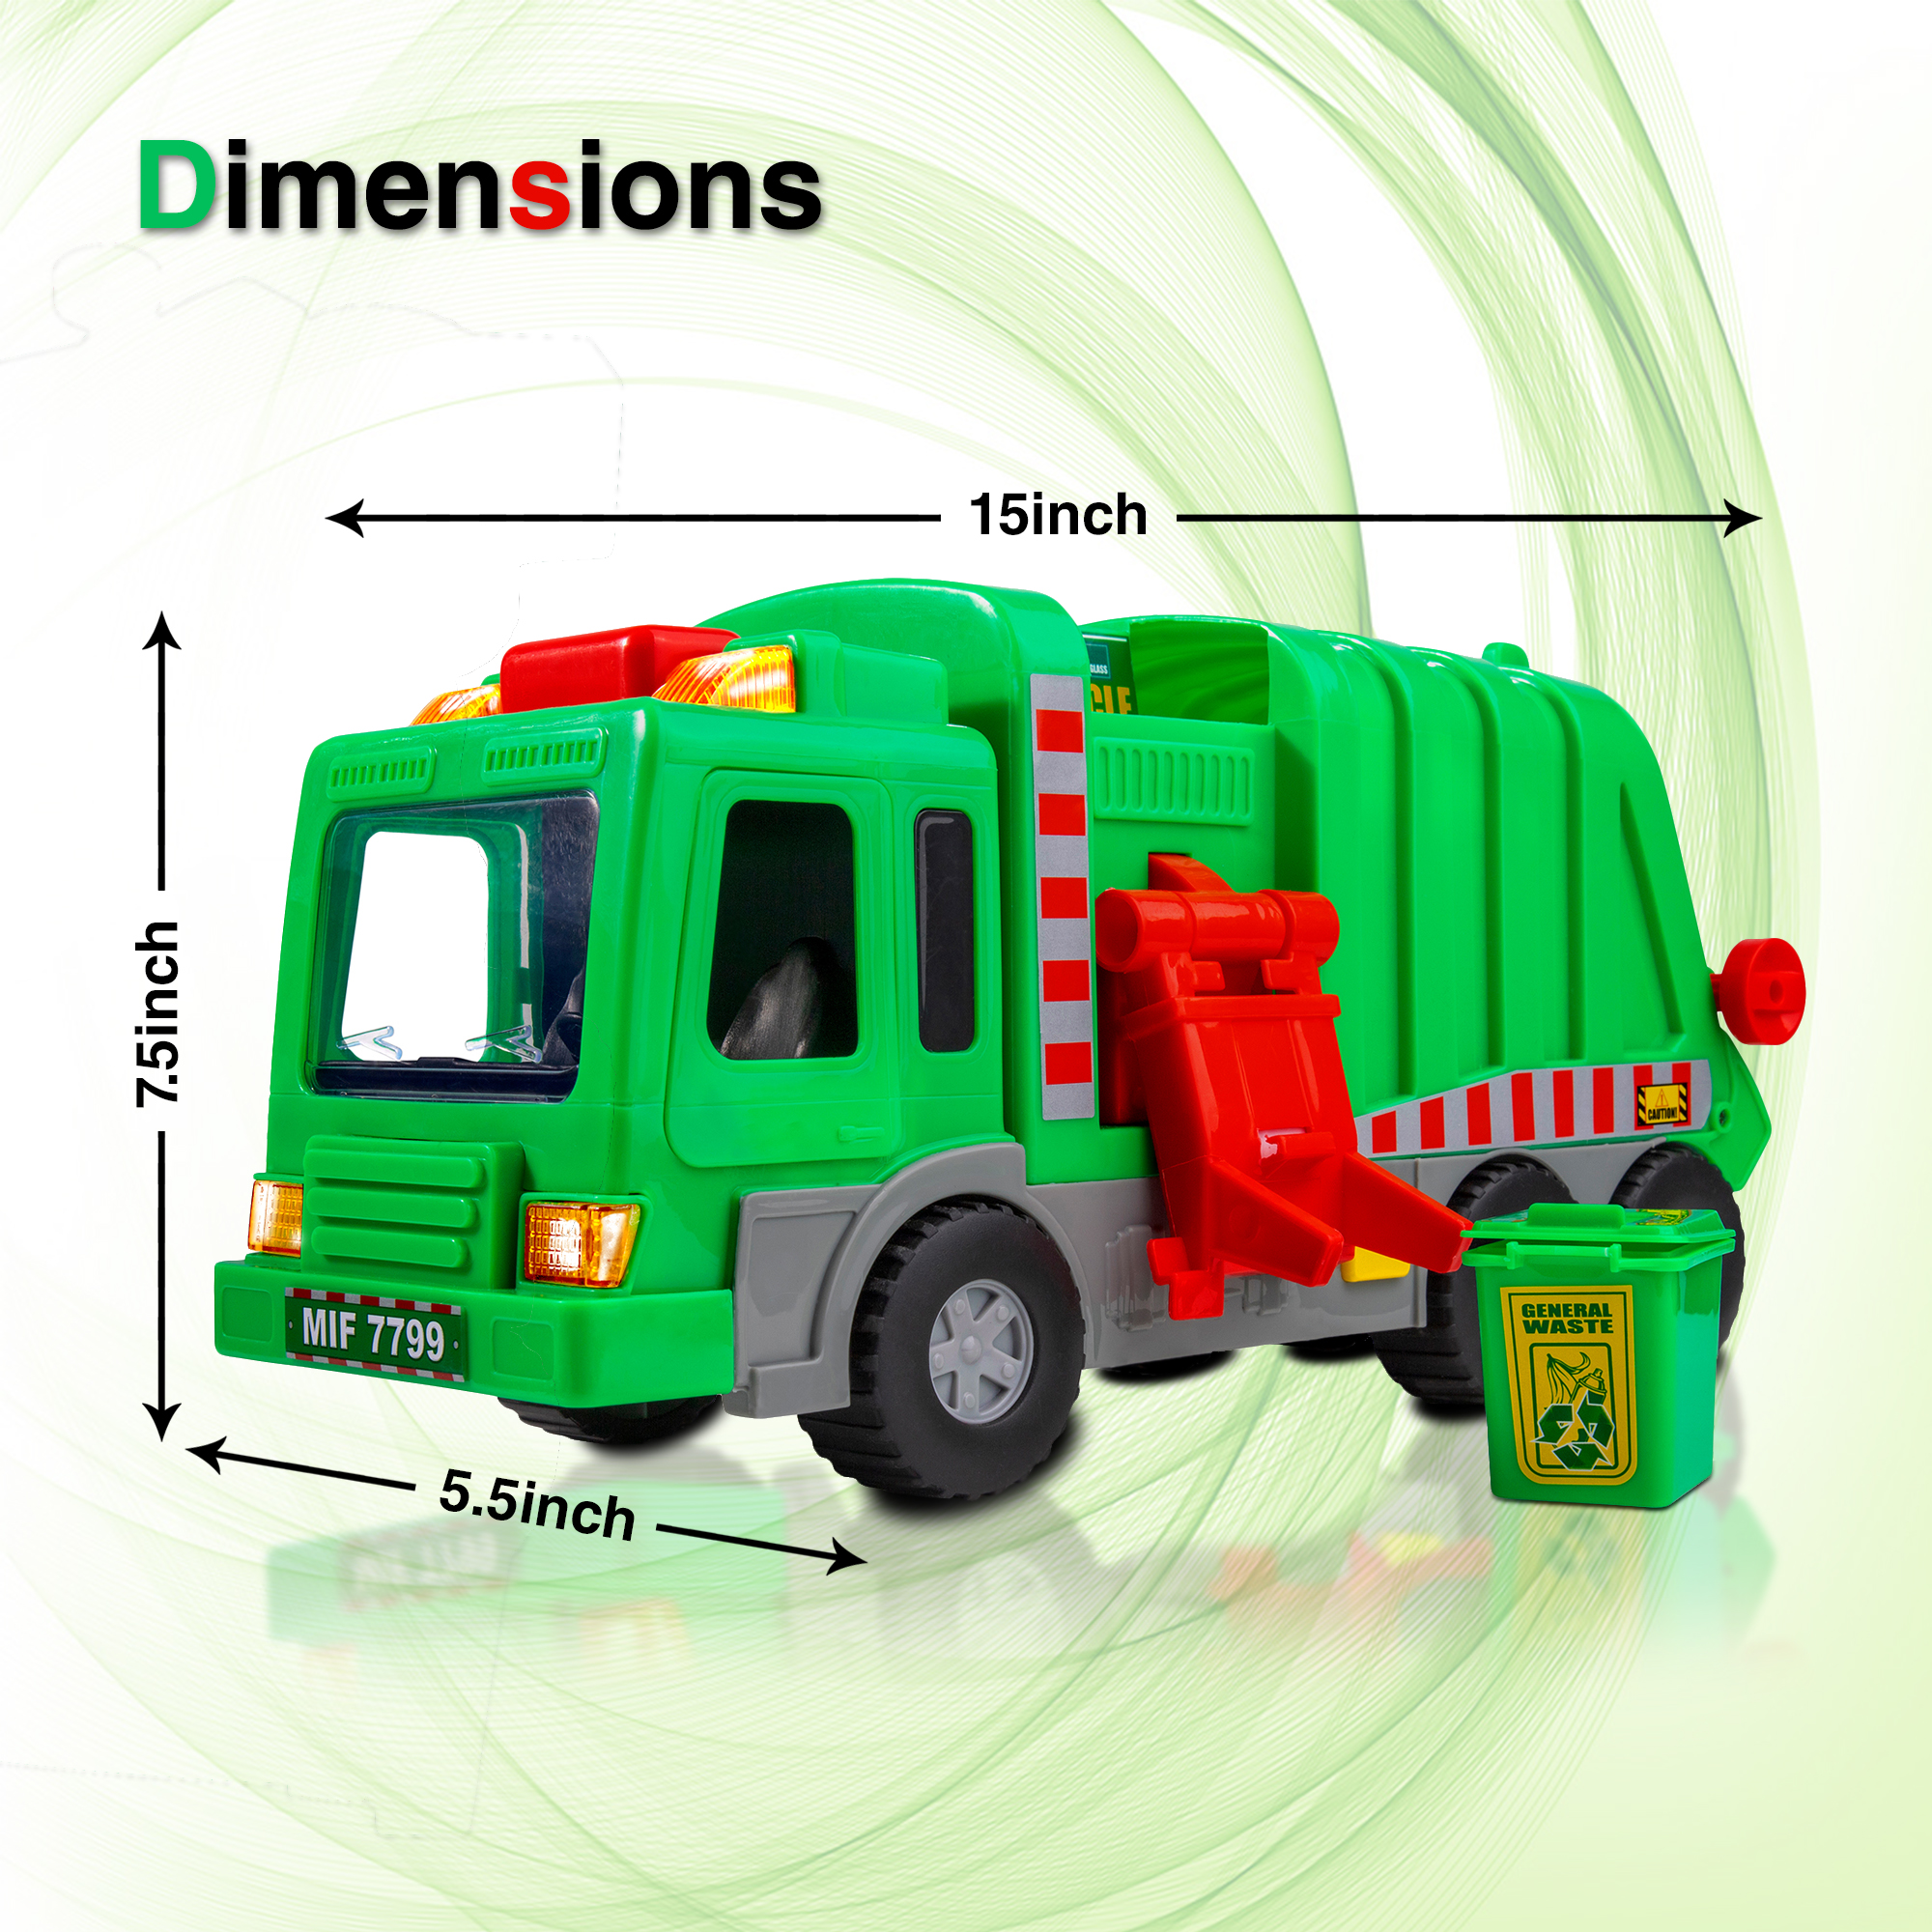 Playkidz Kids 15" Garbage Truck Toy with Lights, Sounds, and Manual Trash Lid, Interactive Early Learning Play for Kids, Indoor and Outdoor Safe, Heavy Duty Plastic - image 3 of 7